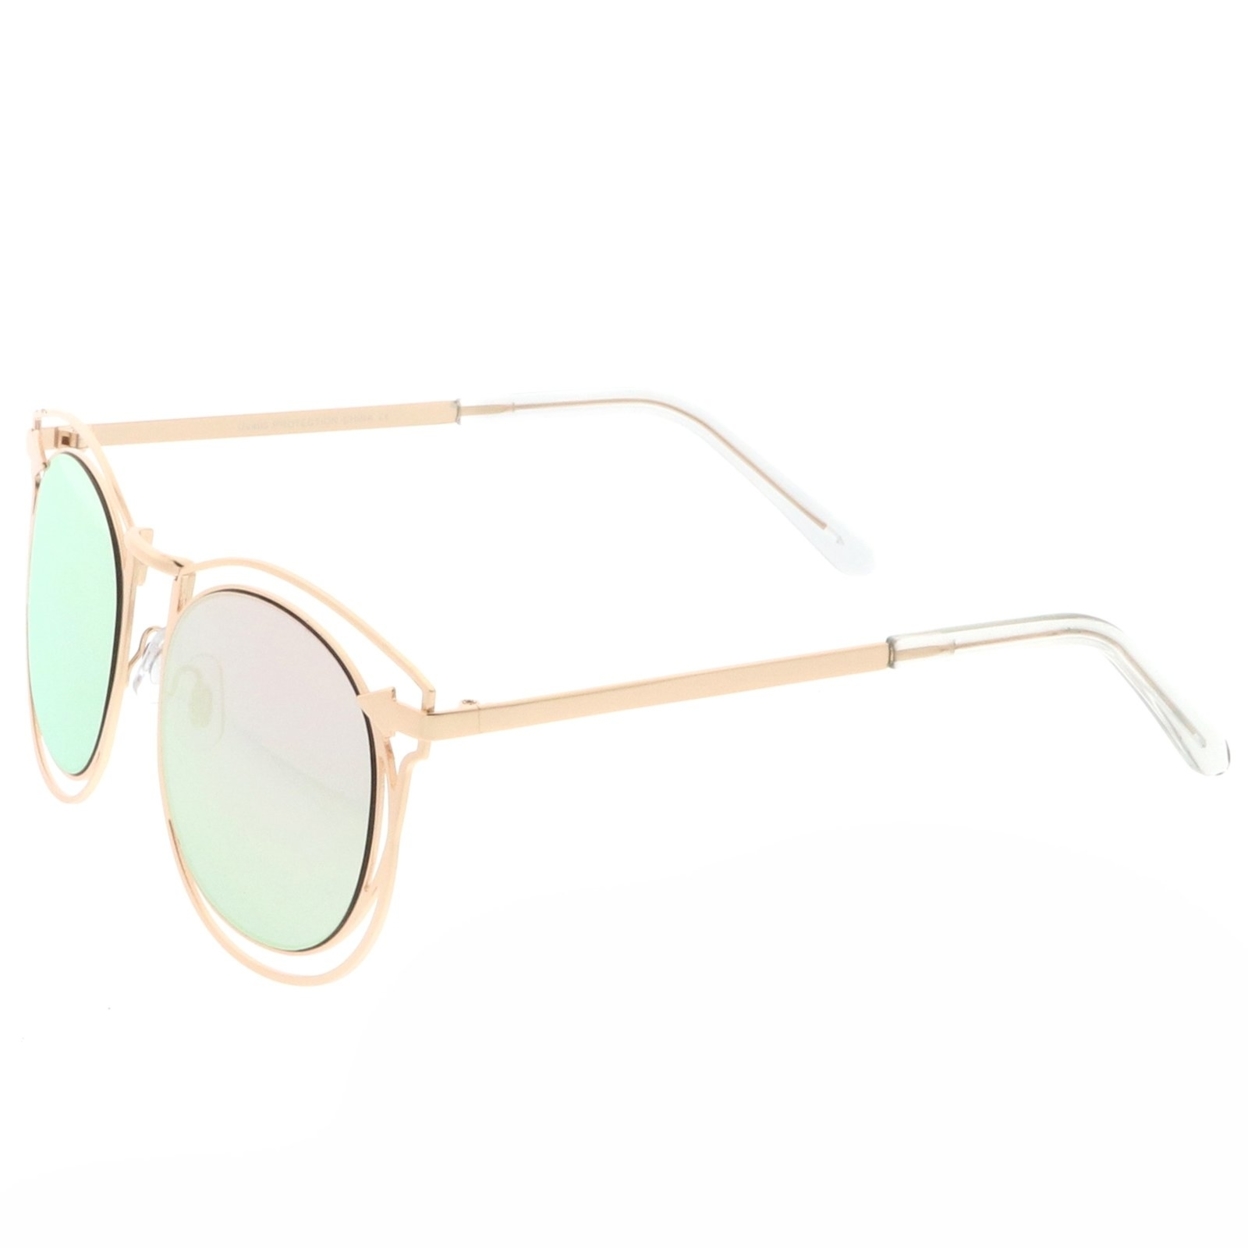 Oversize Open Metal Horn Rimmed Sunglasses With Arrow Design And Round Mirror Flat Lens 55mm - Pink / Silver Mirror